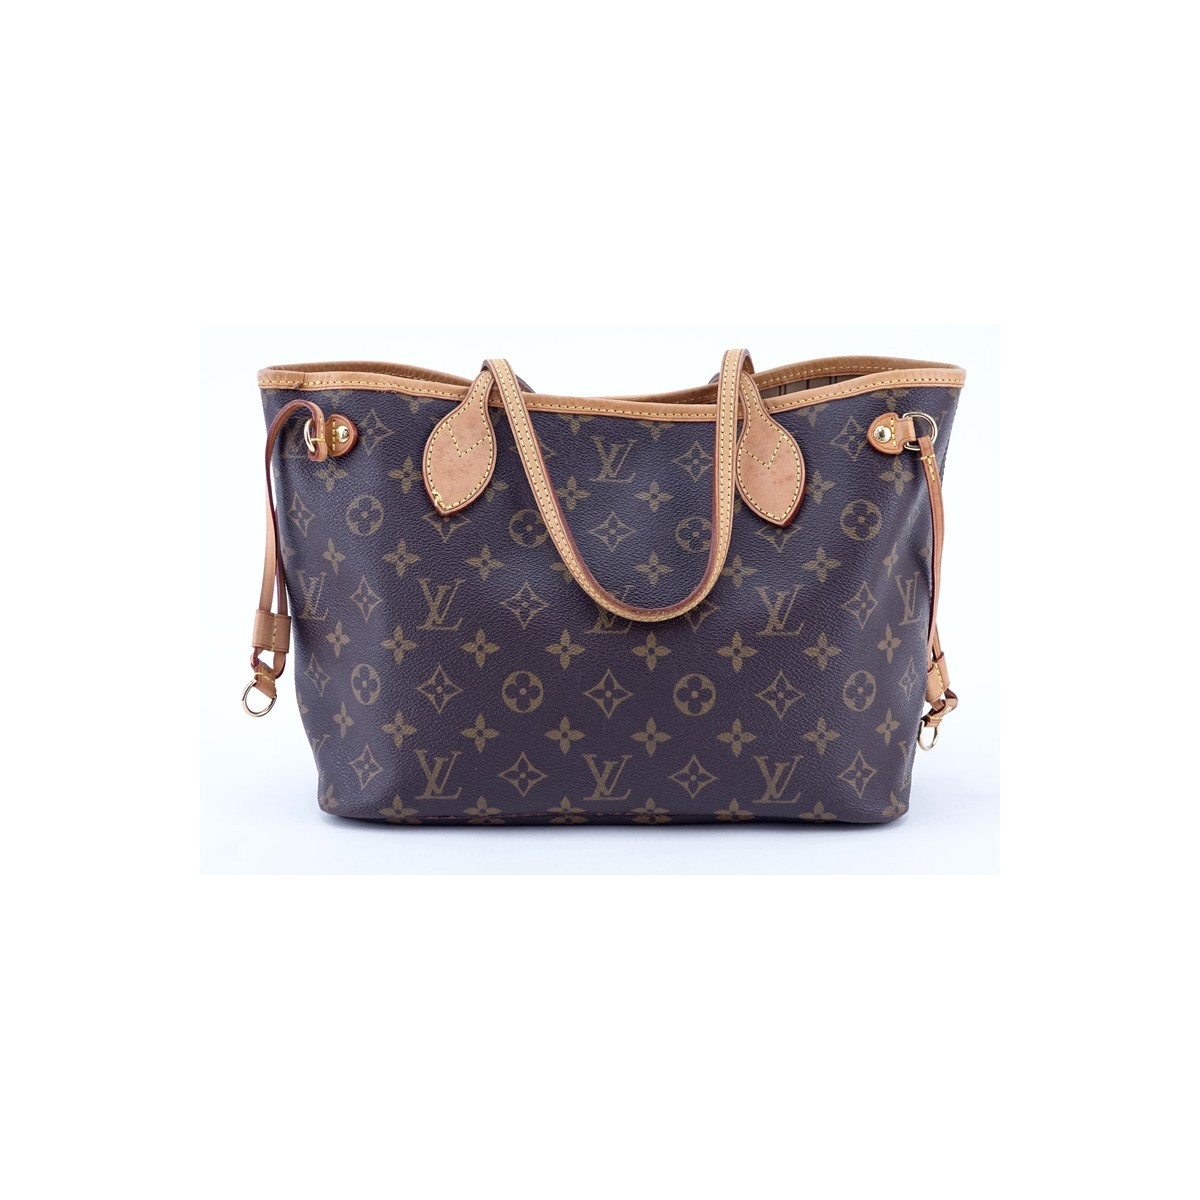 Louis Vuitton Brown Monogram Coated Canvas And Leather Neverfull PM Handbag. Golden brass hardware, signature canvas interior with zippered pocket, vachetta straps.